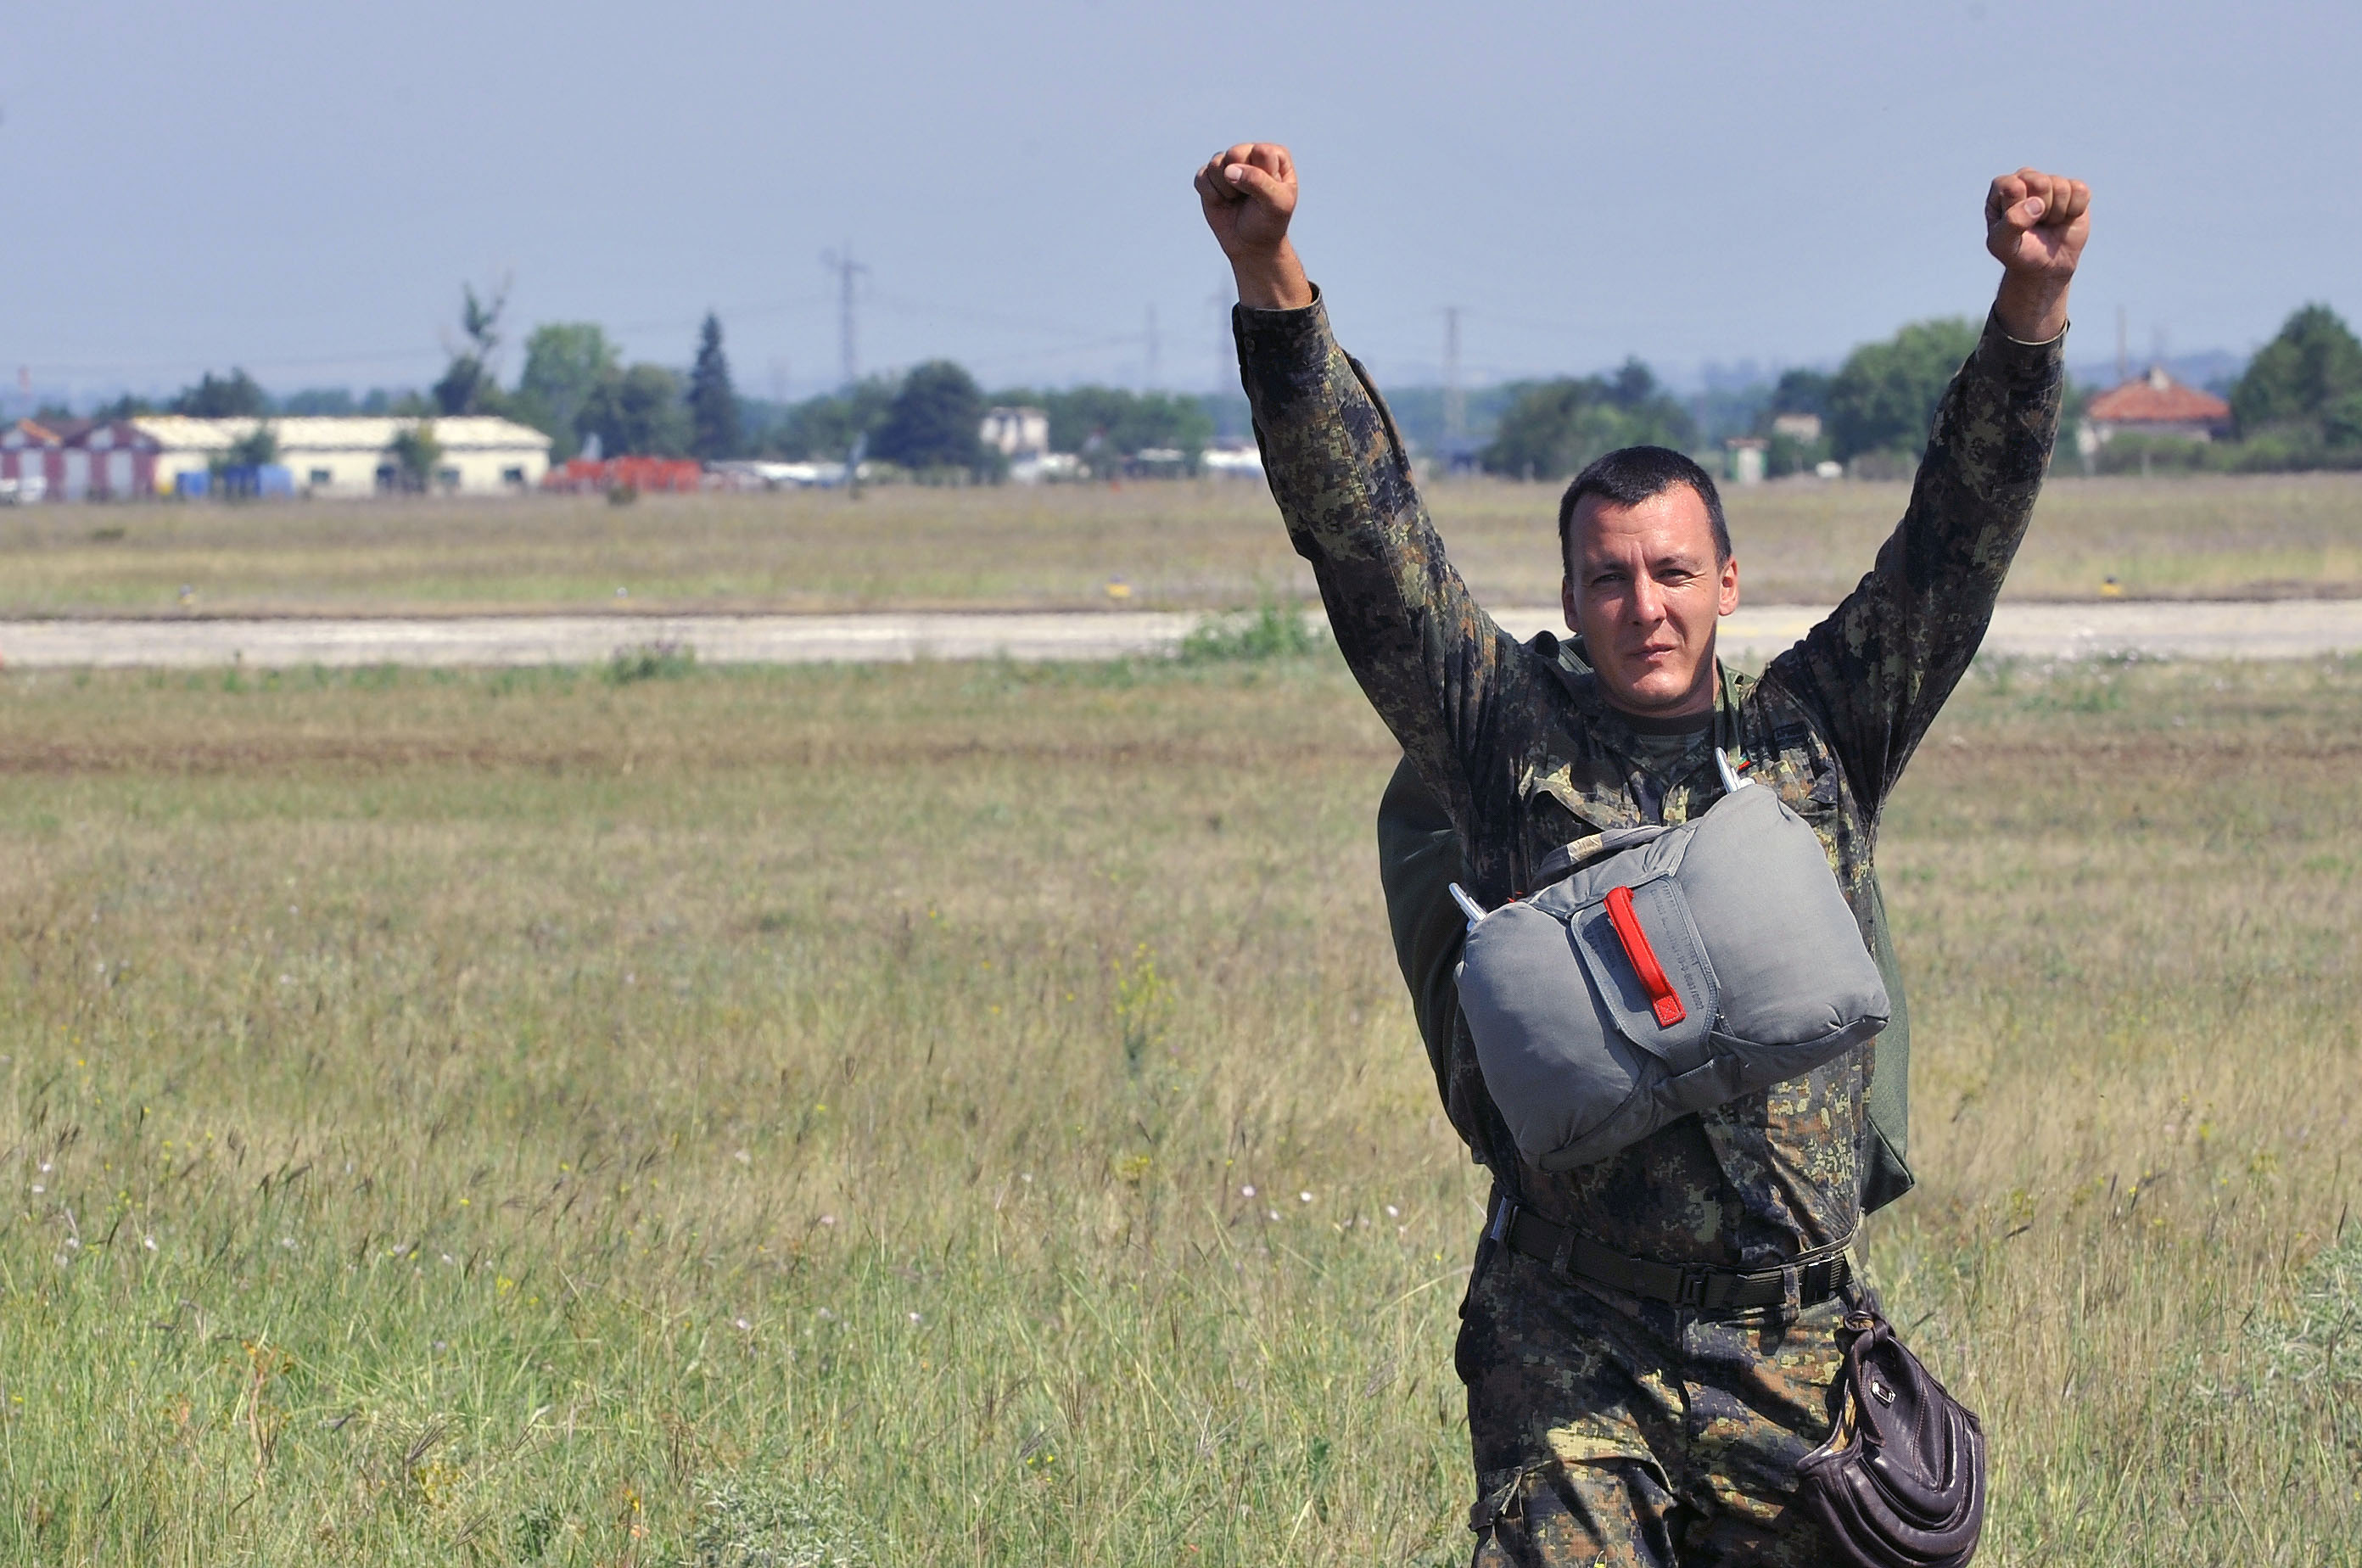 U.S. Airmen jump with Bulgarians during two-week flying training ...